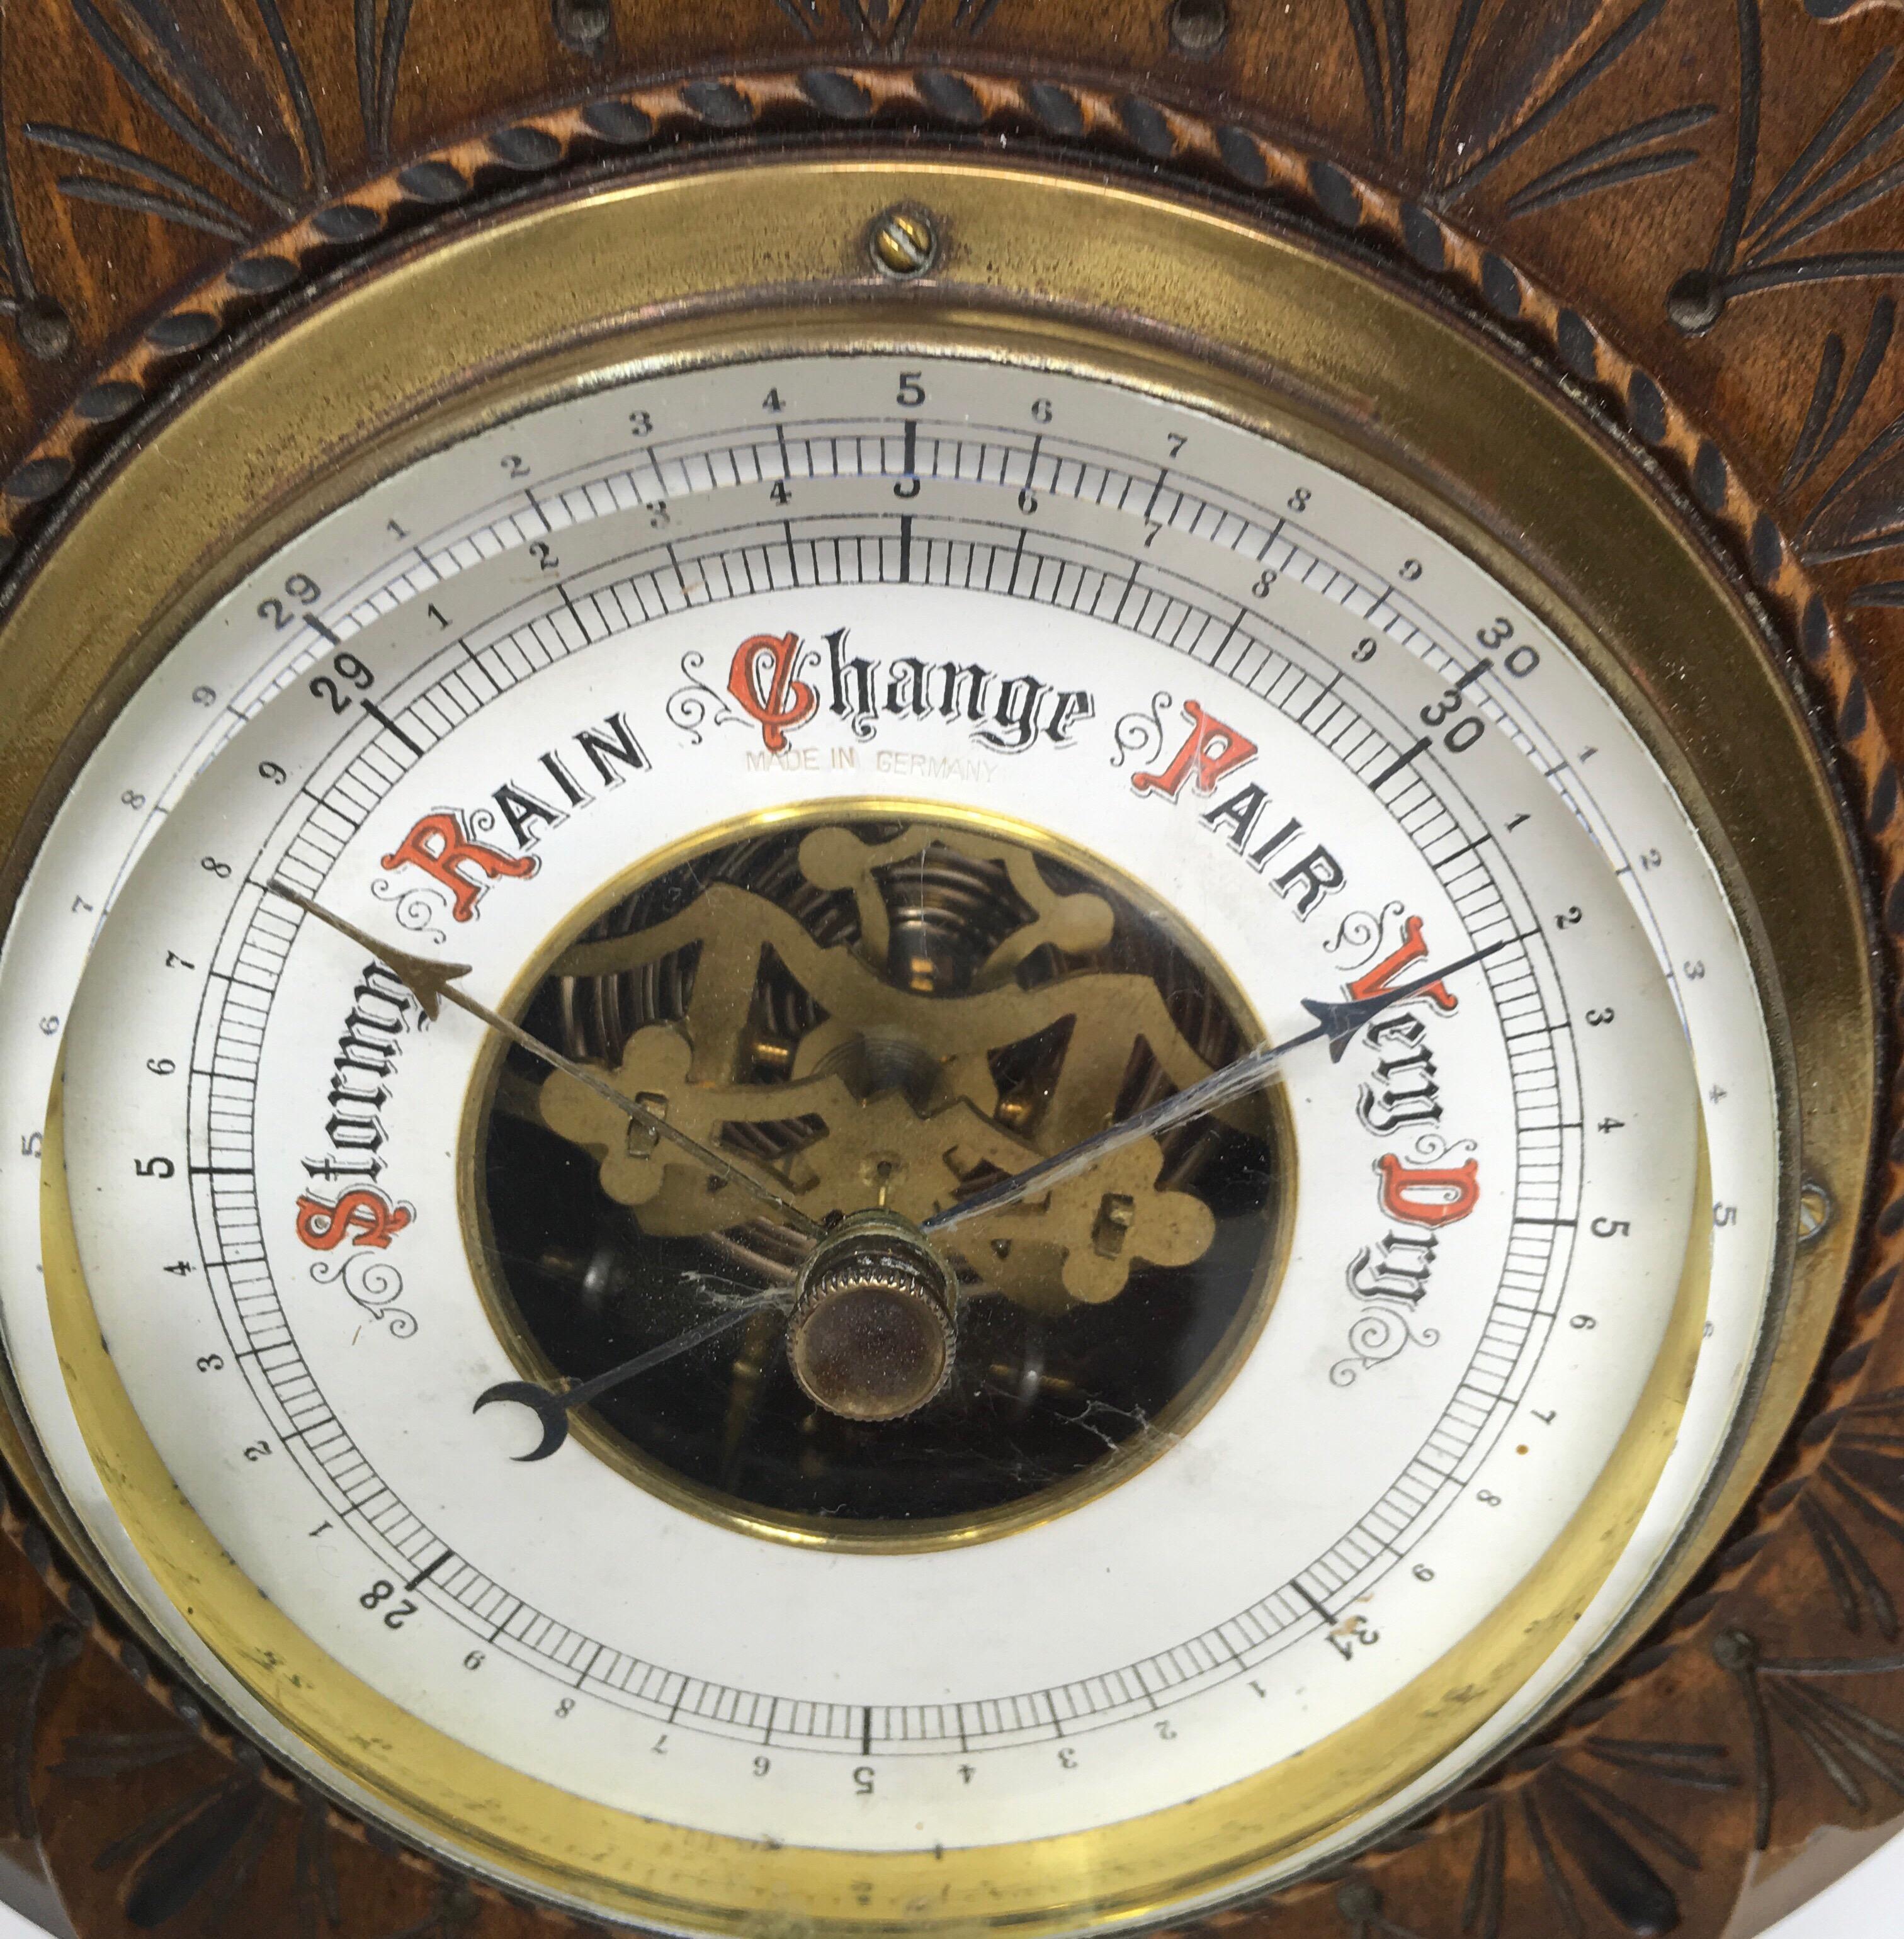 Very nice vintage carved wood barometer with a brass bezel and thick glass beveled edge from Germany. The enamel dial along with the visible movement are in good condition and very decorative.